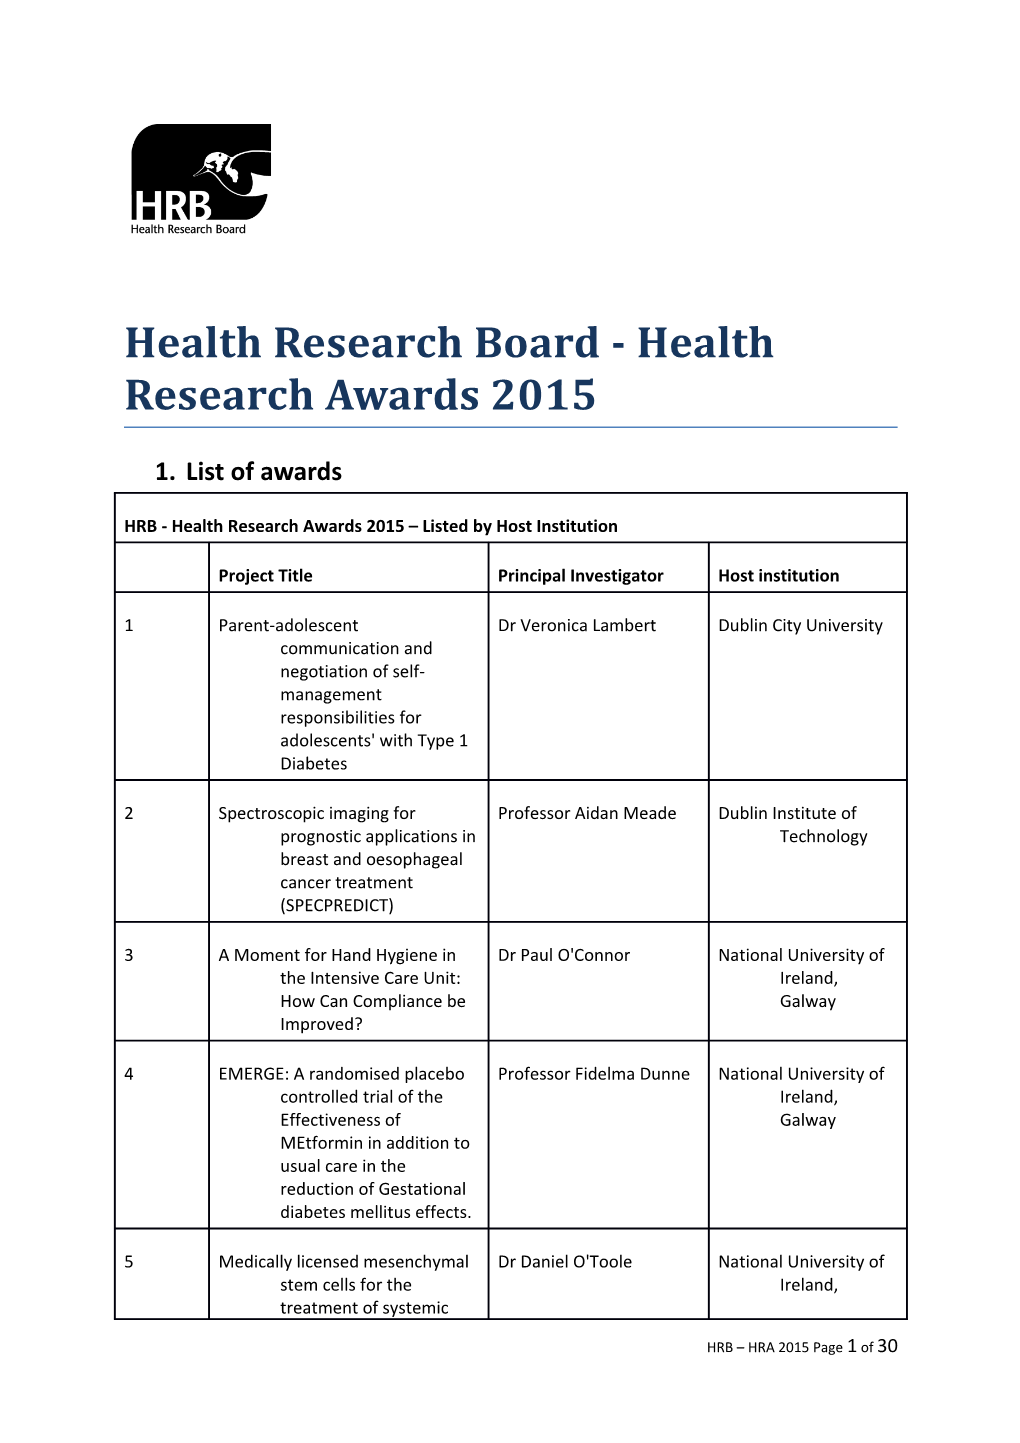 HRB - Health Research Awards 2015 Listed by Host Institution